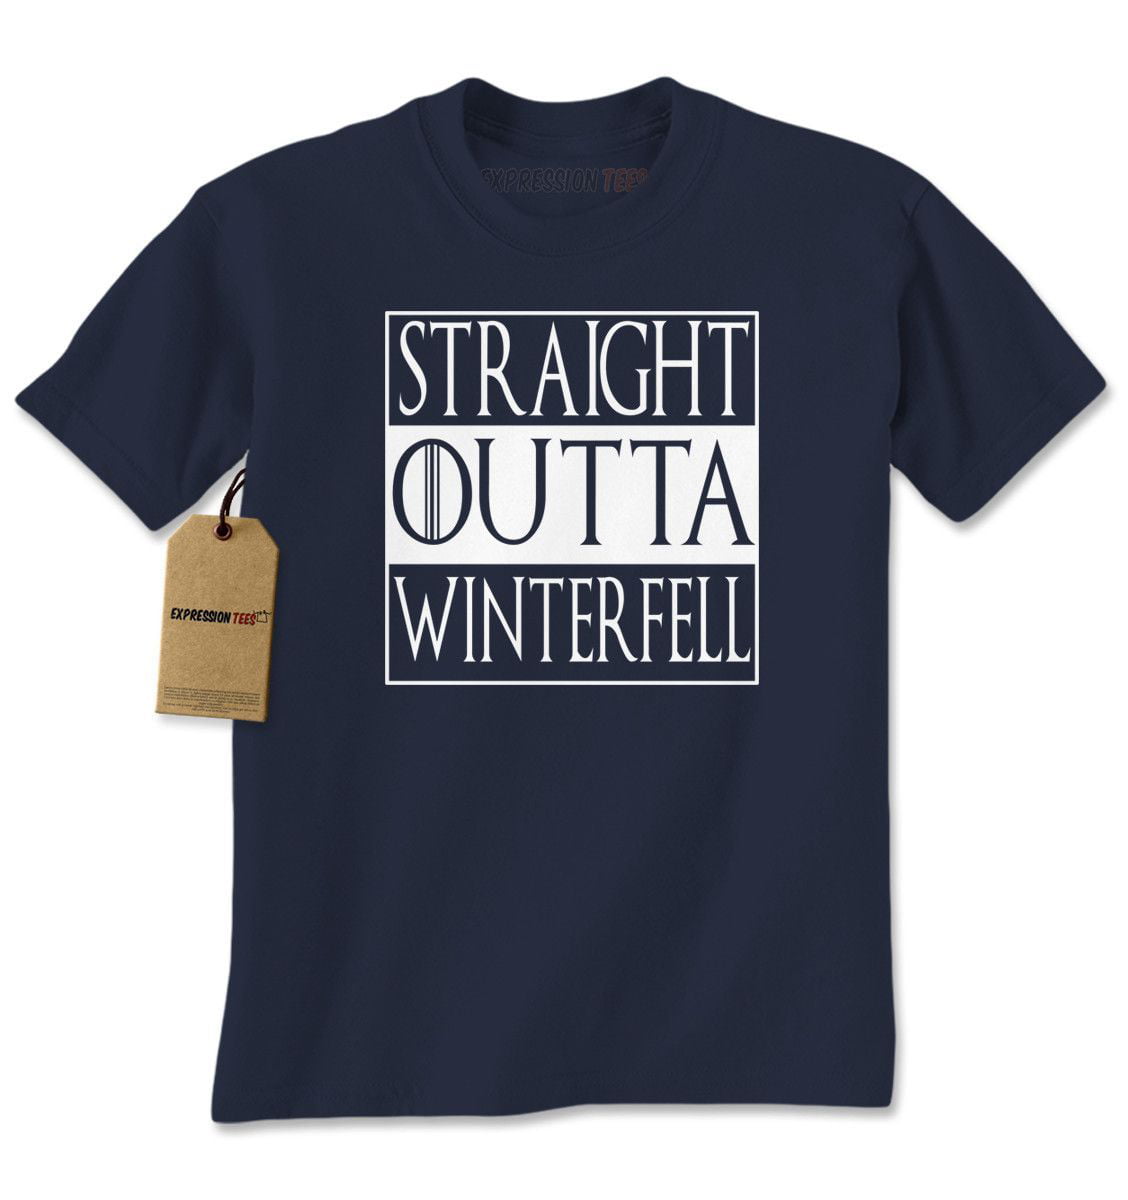 Expression Tees Lady Of Winterfell Shopping Tote Bag